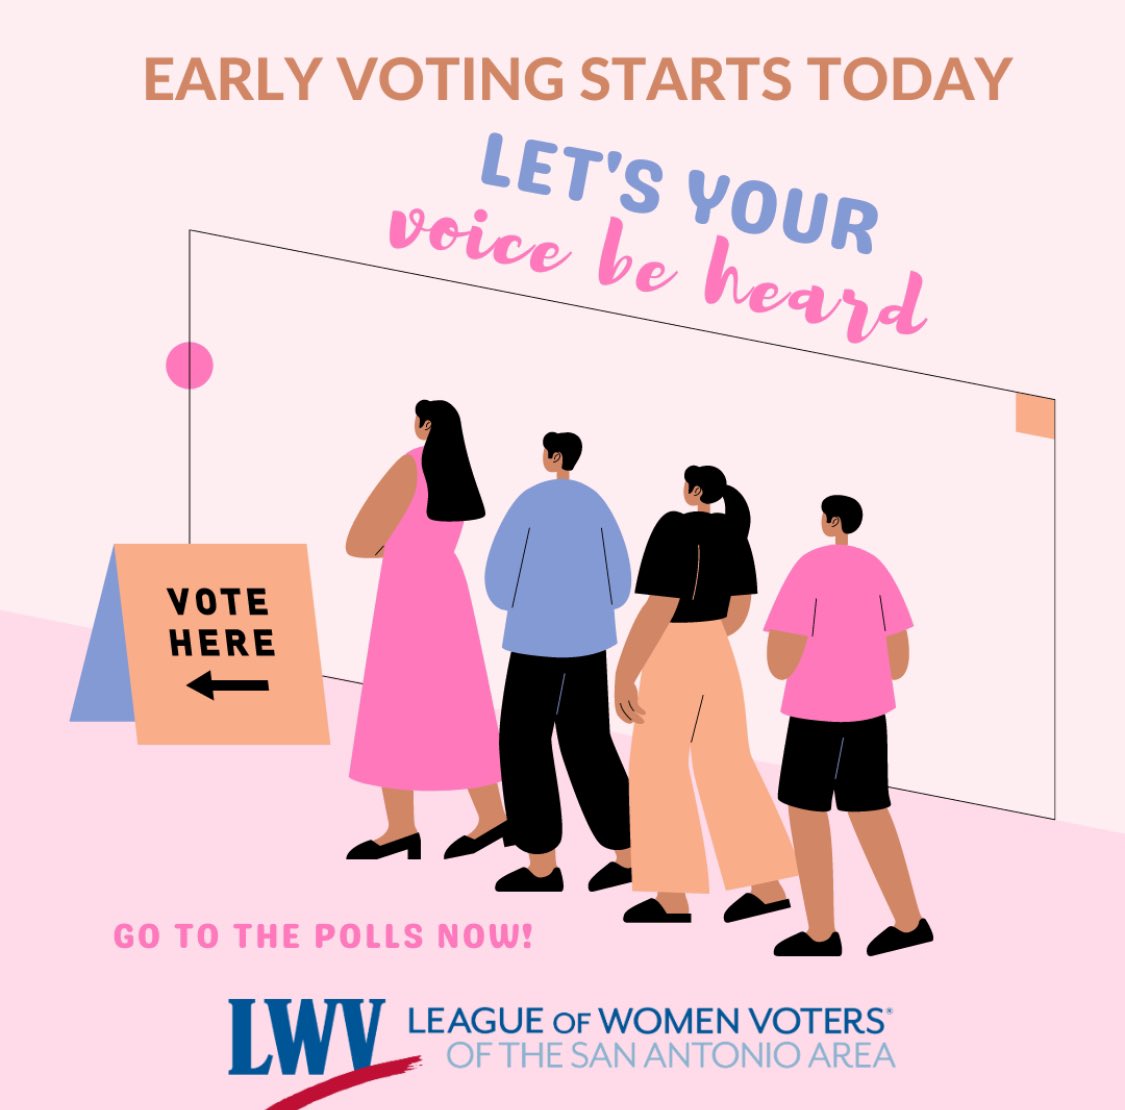 Today is the first day of Early Voting in the local elections! You can vote early now through Tuesday, Apr. 30th. 

Your vote matters!

#BeATexasVoter in the #LocalTXElections!